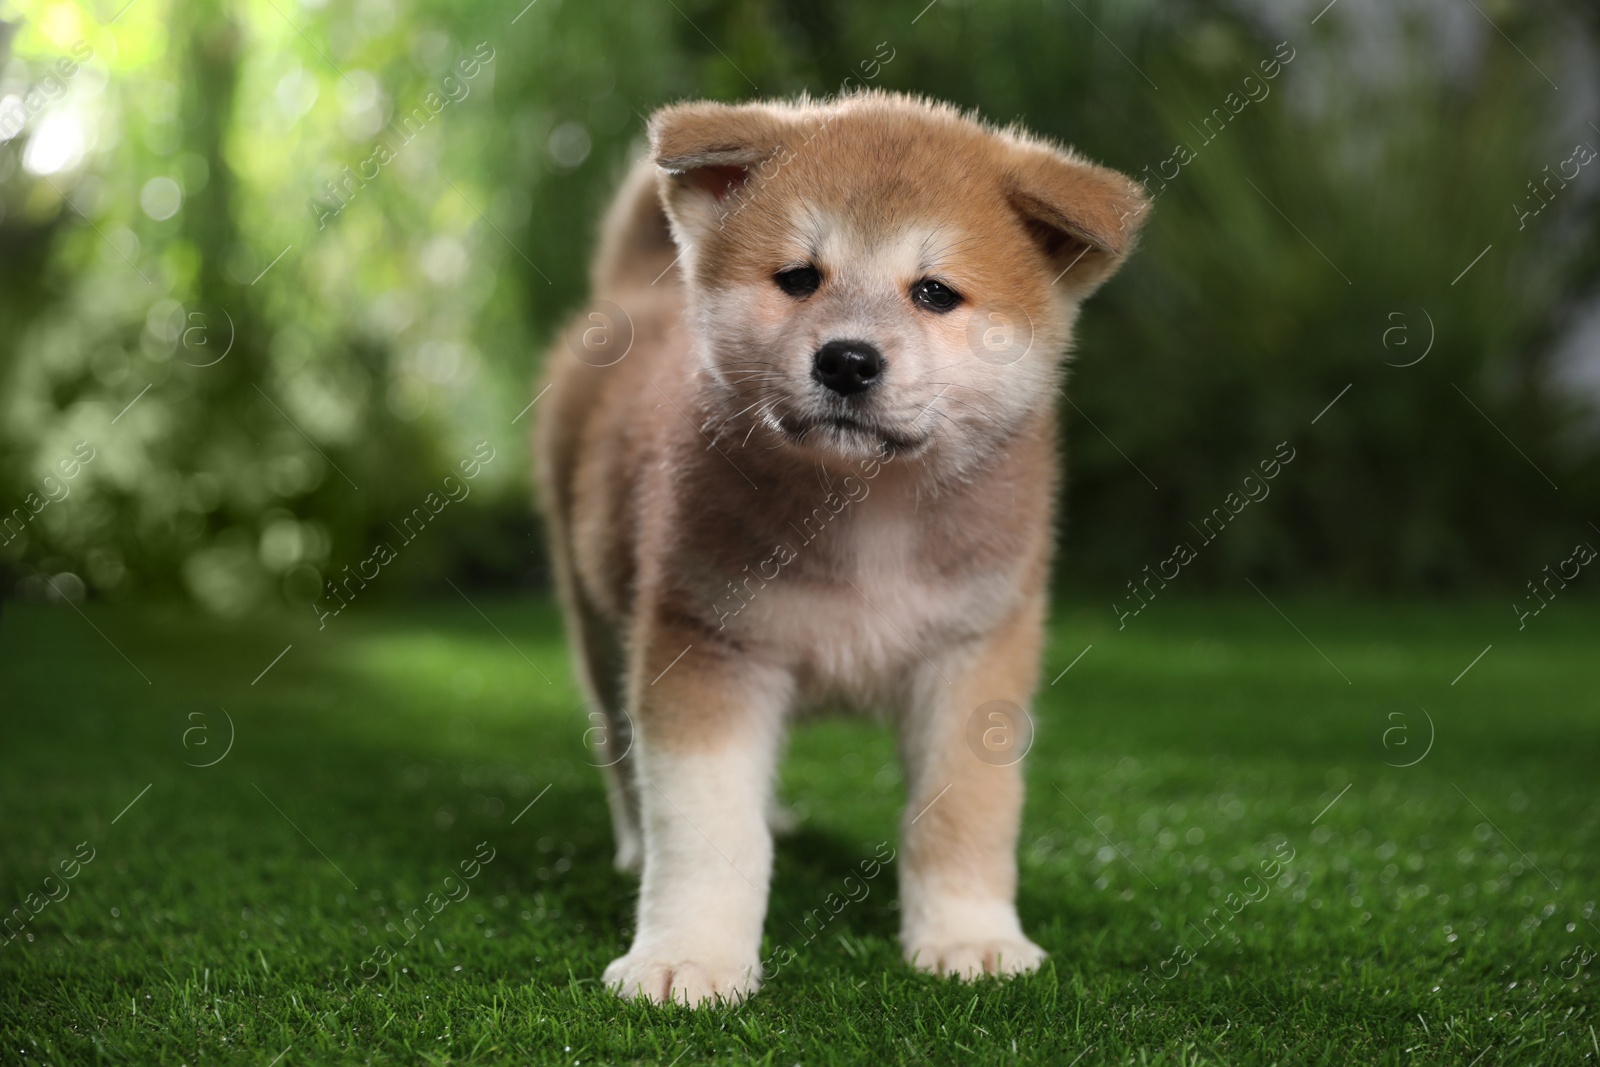 Photo of Adorable Akita Inu puppy on green grass outdoors